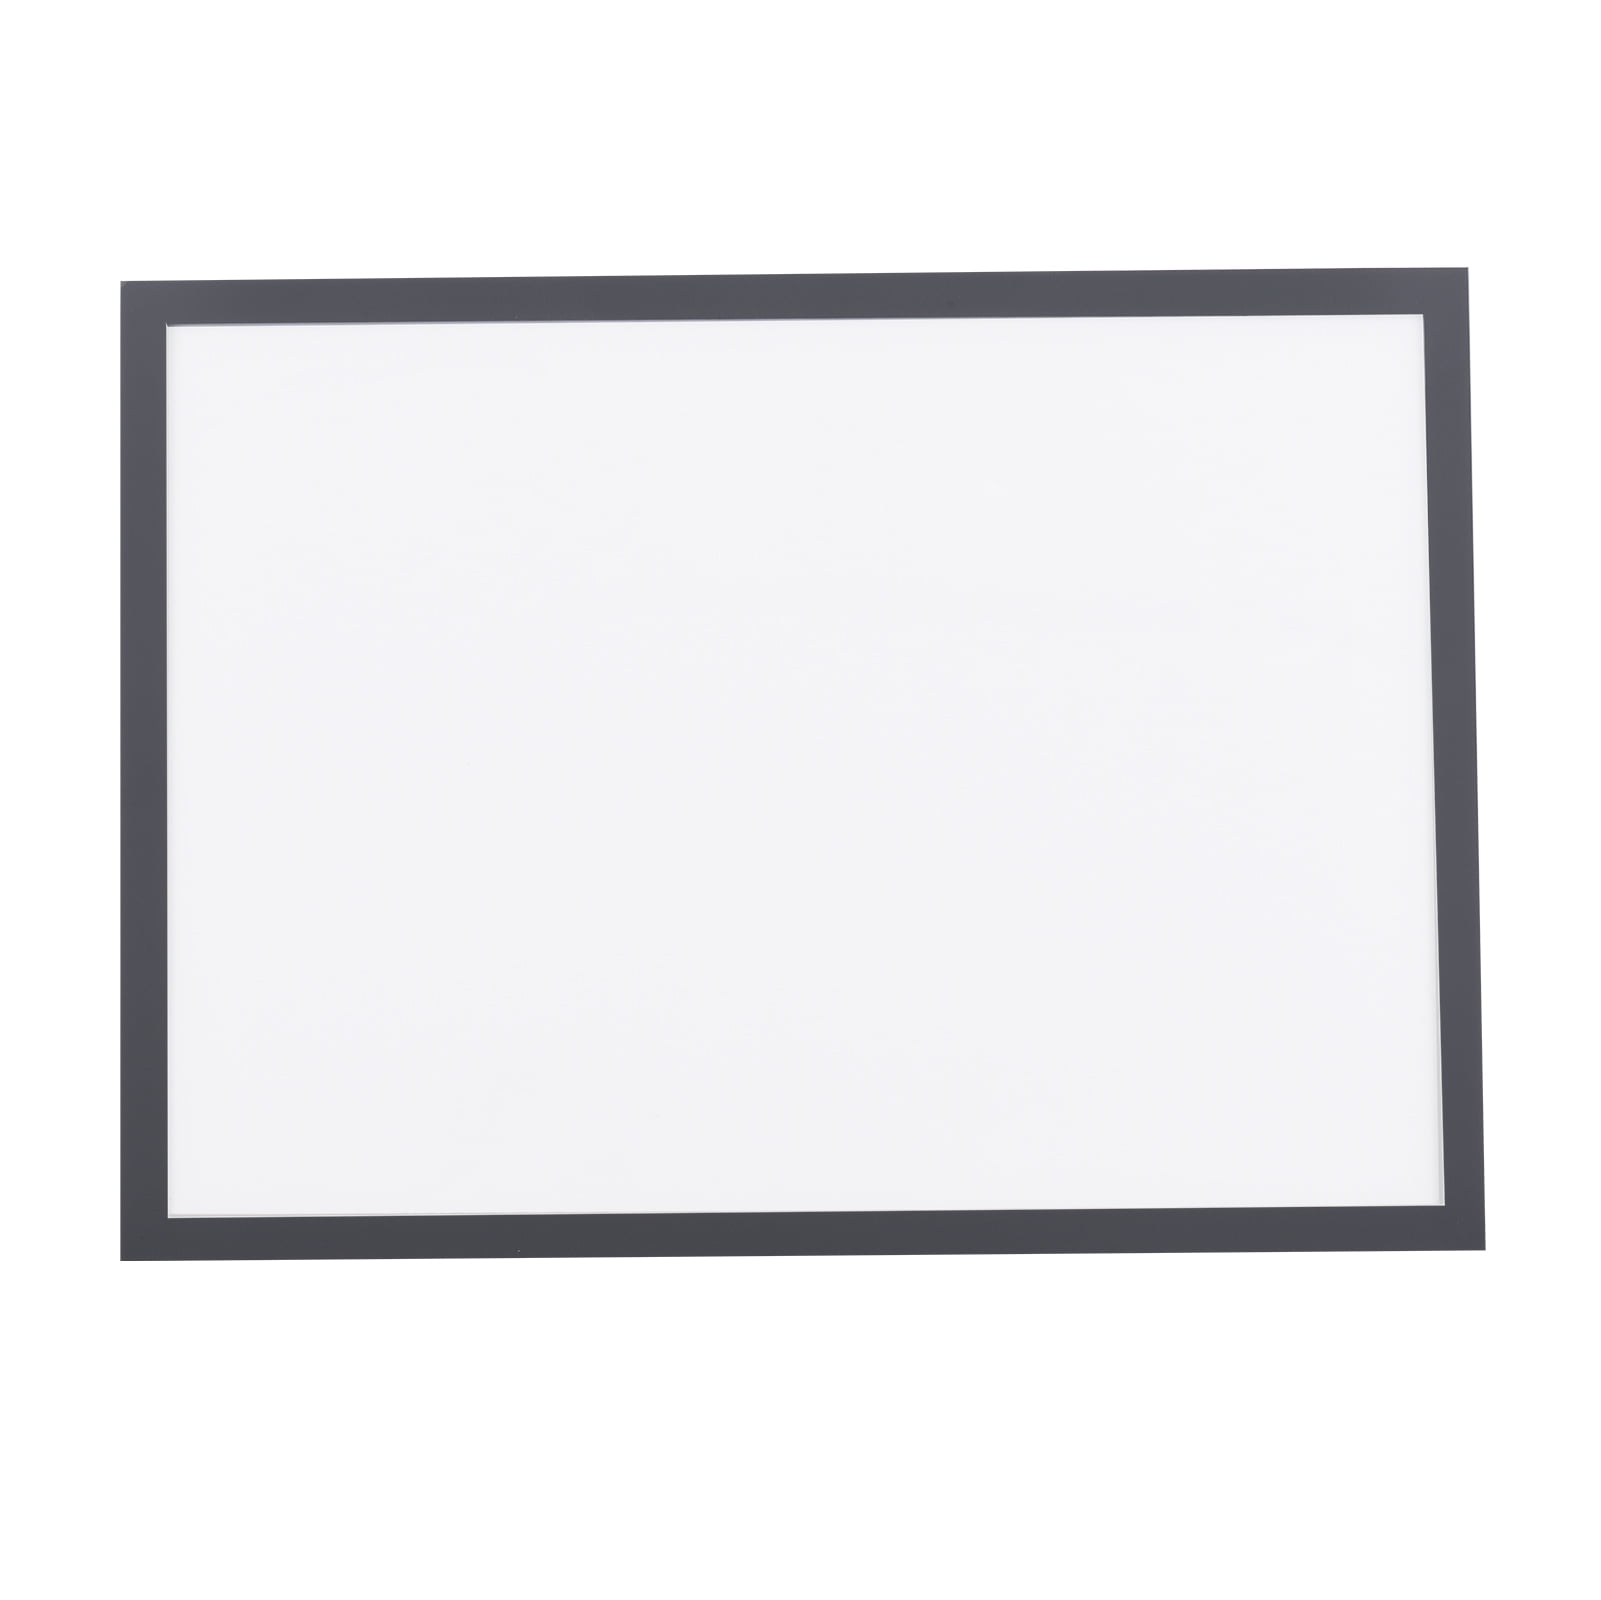 Magnetic Frame,Tickas Magnetic File Frame Transparent PVC Document Display Frame for A4 Size Letter Paper Photo Picture Work Schedule